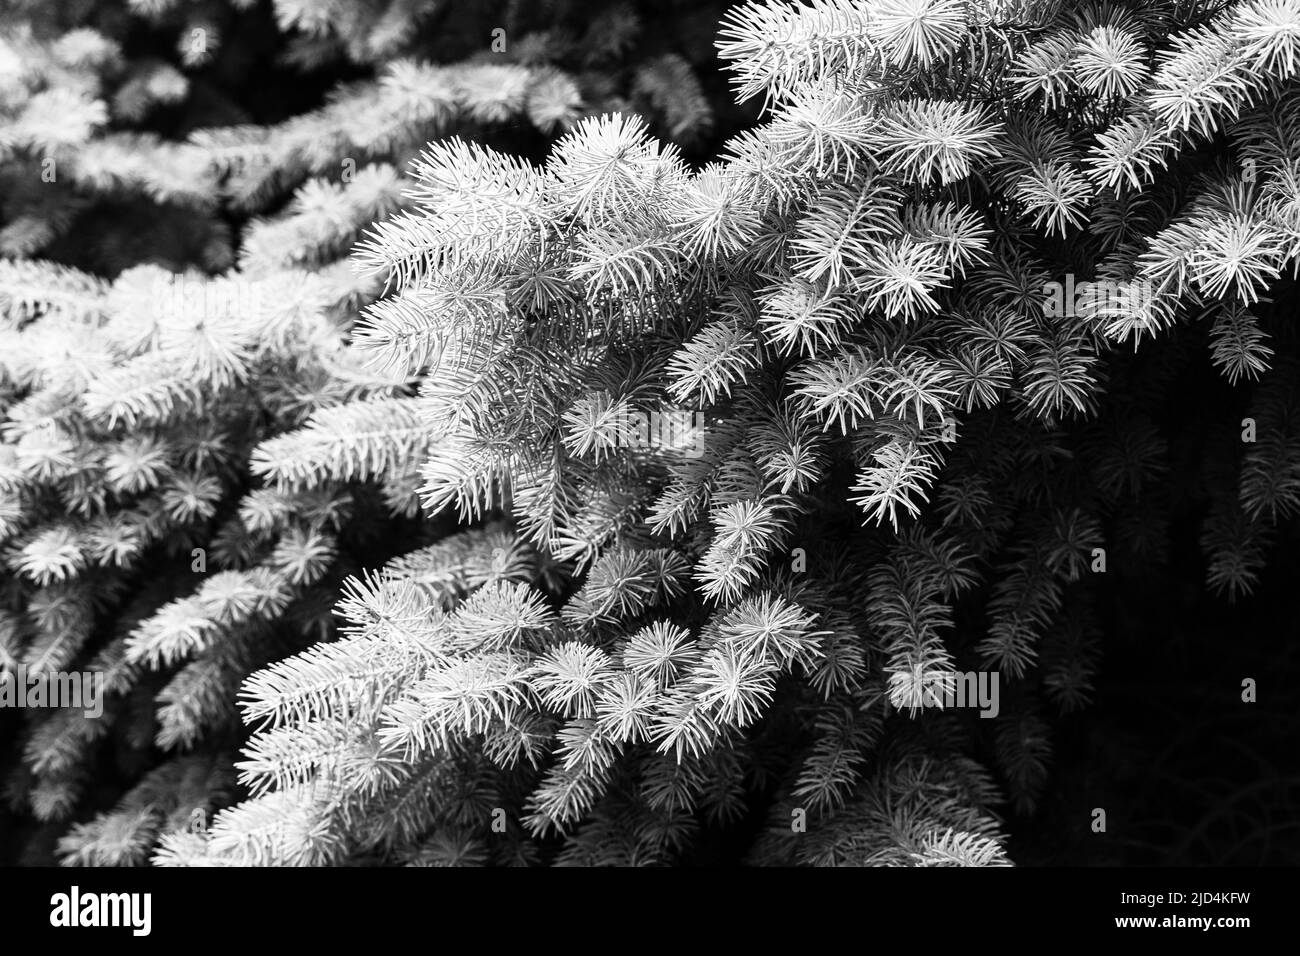 Silver pine tree, silver spruce pine, fir tree brunches closeup photo Stock Photo